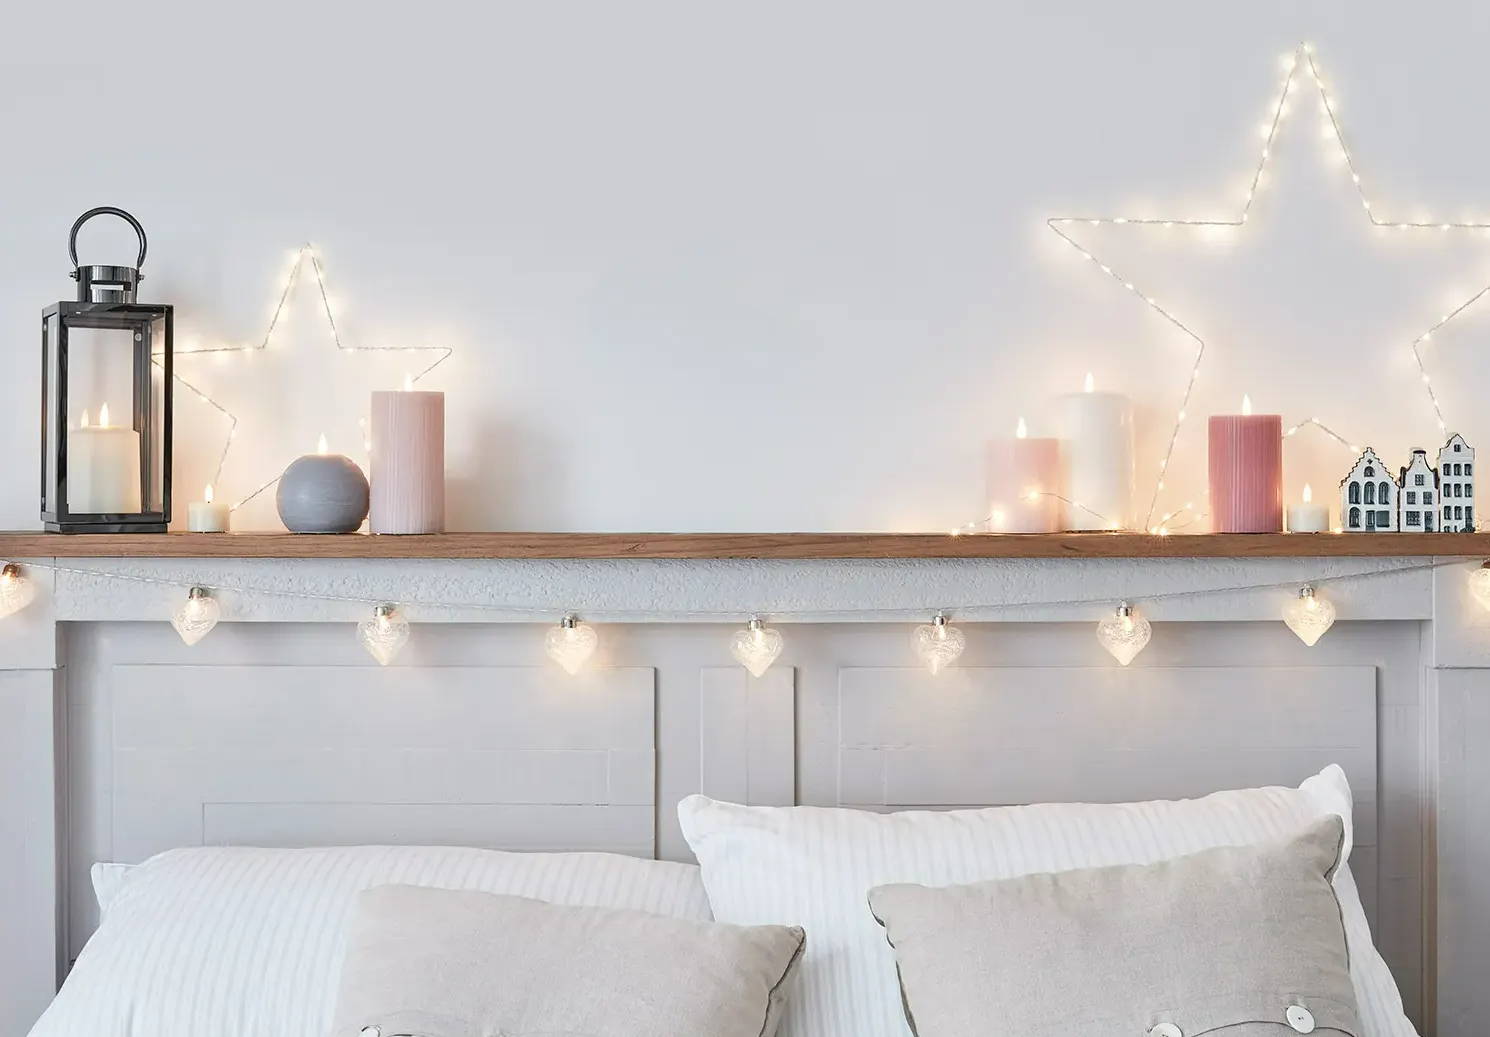 A cosy bedroom setting with stars, fairy lights and candles above a bed.